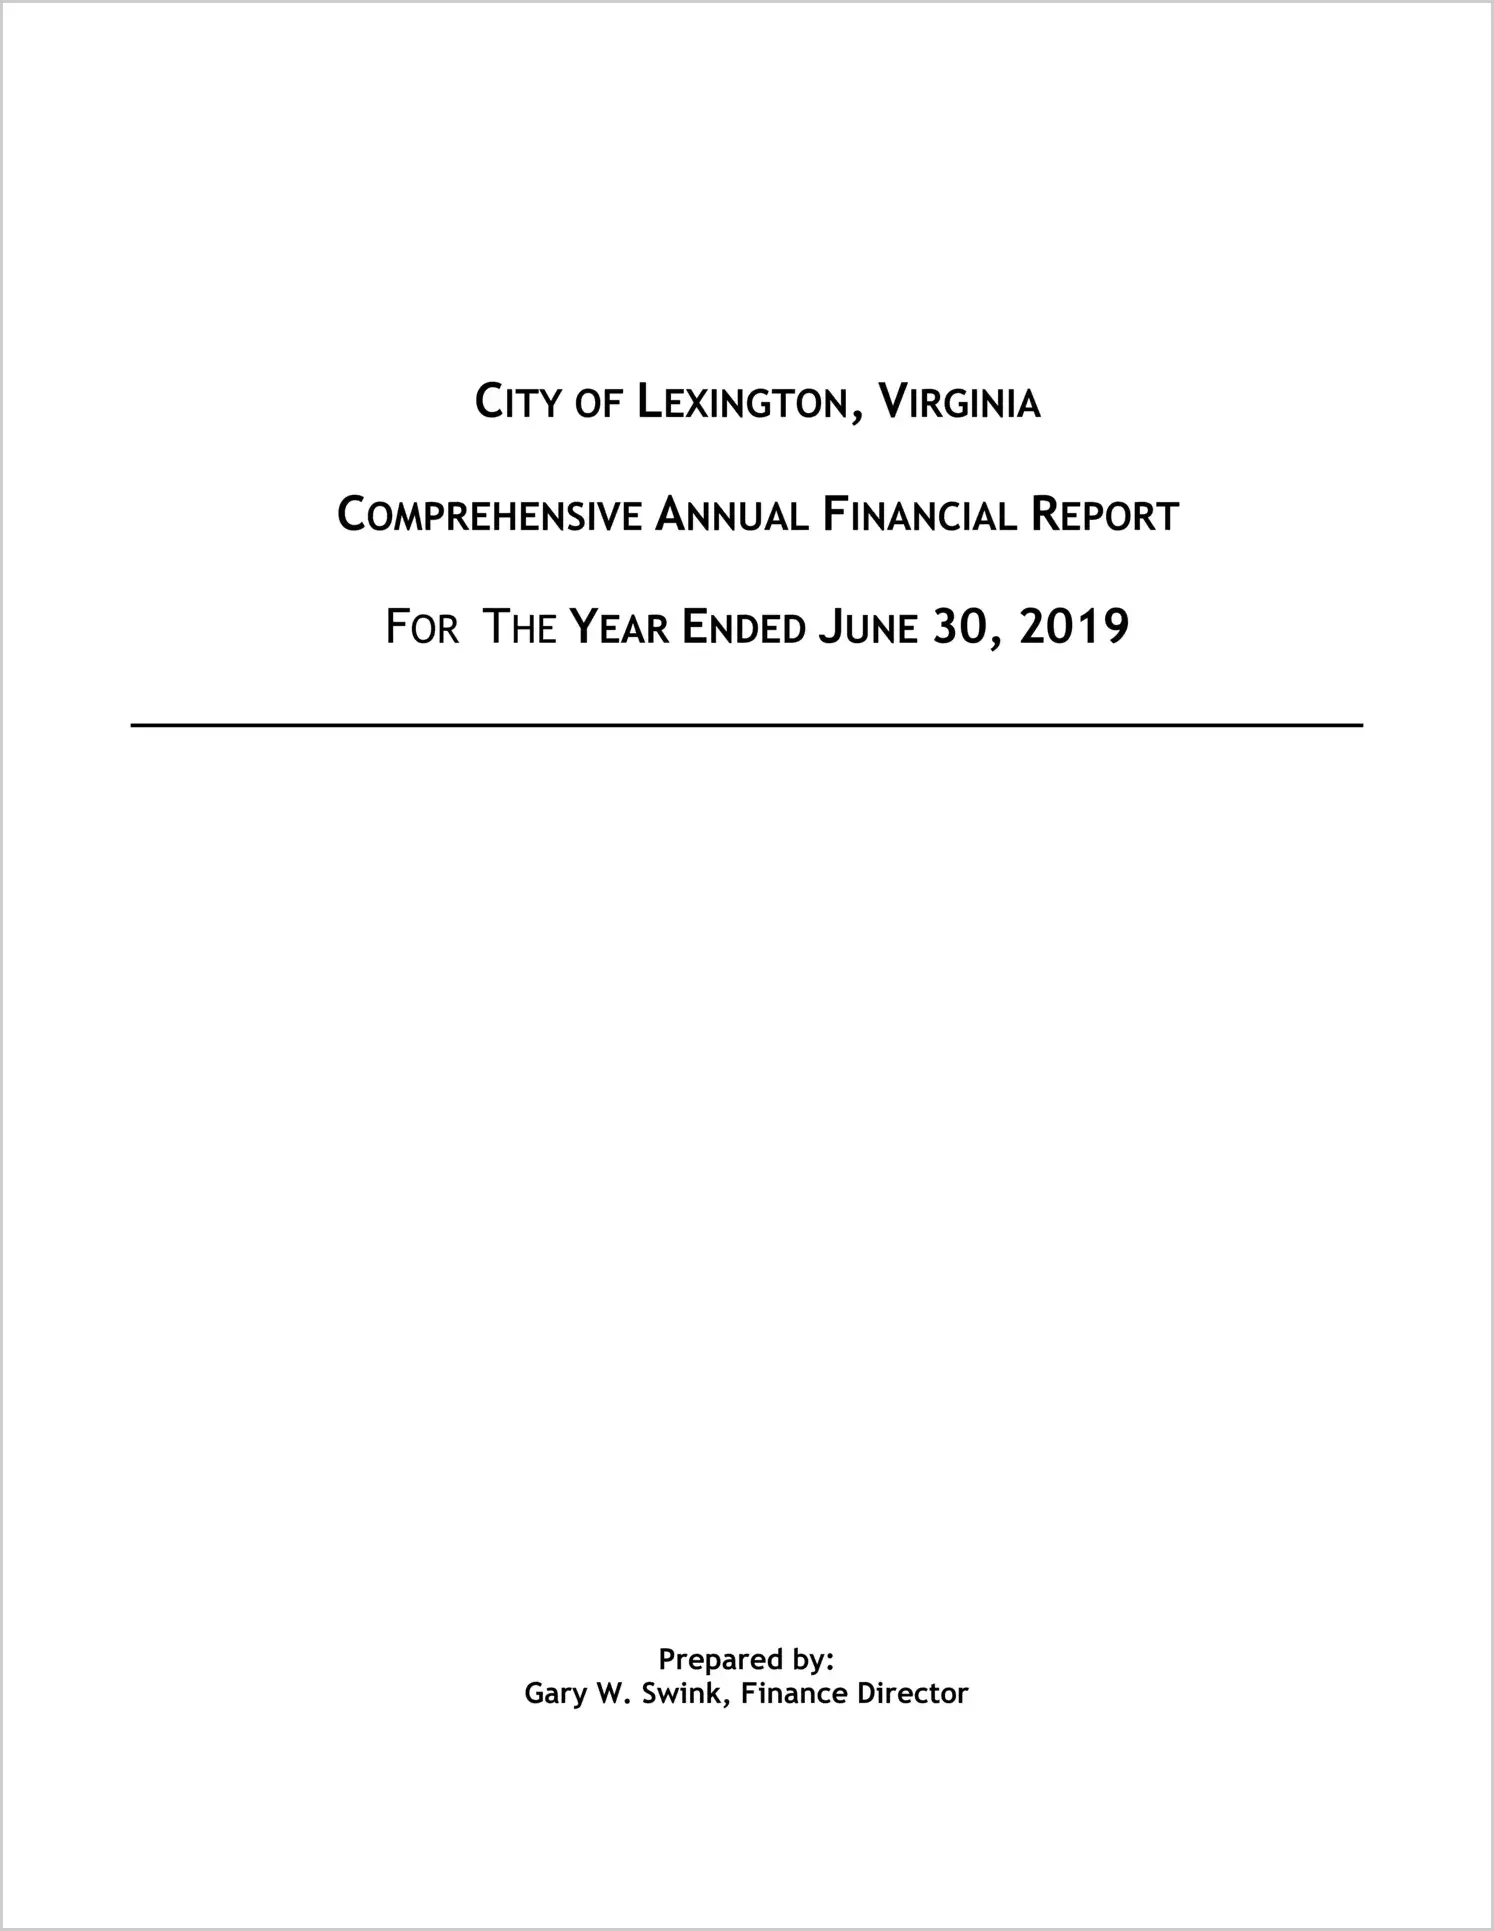 2019 Annual Financial Report for City of Lexington